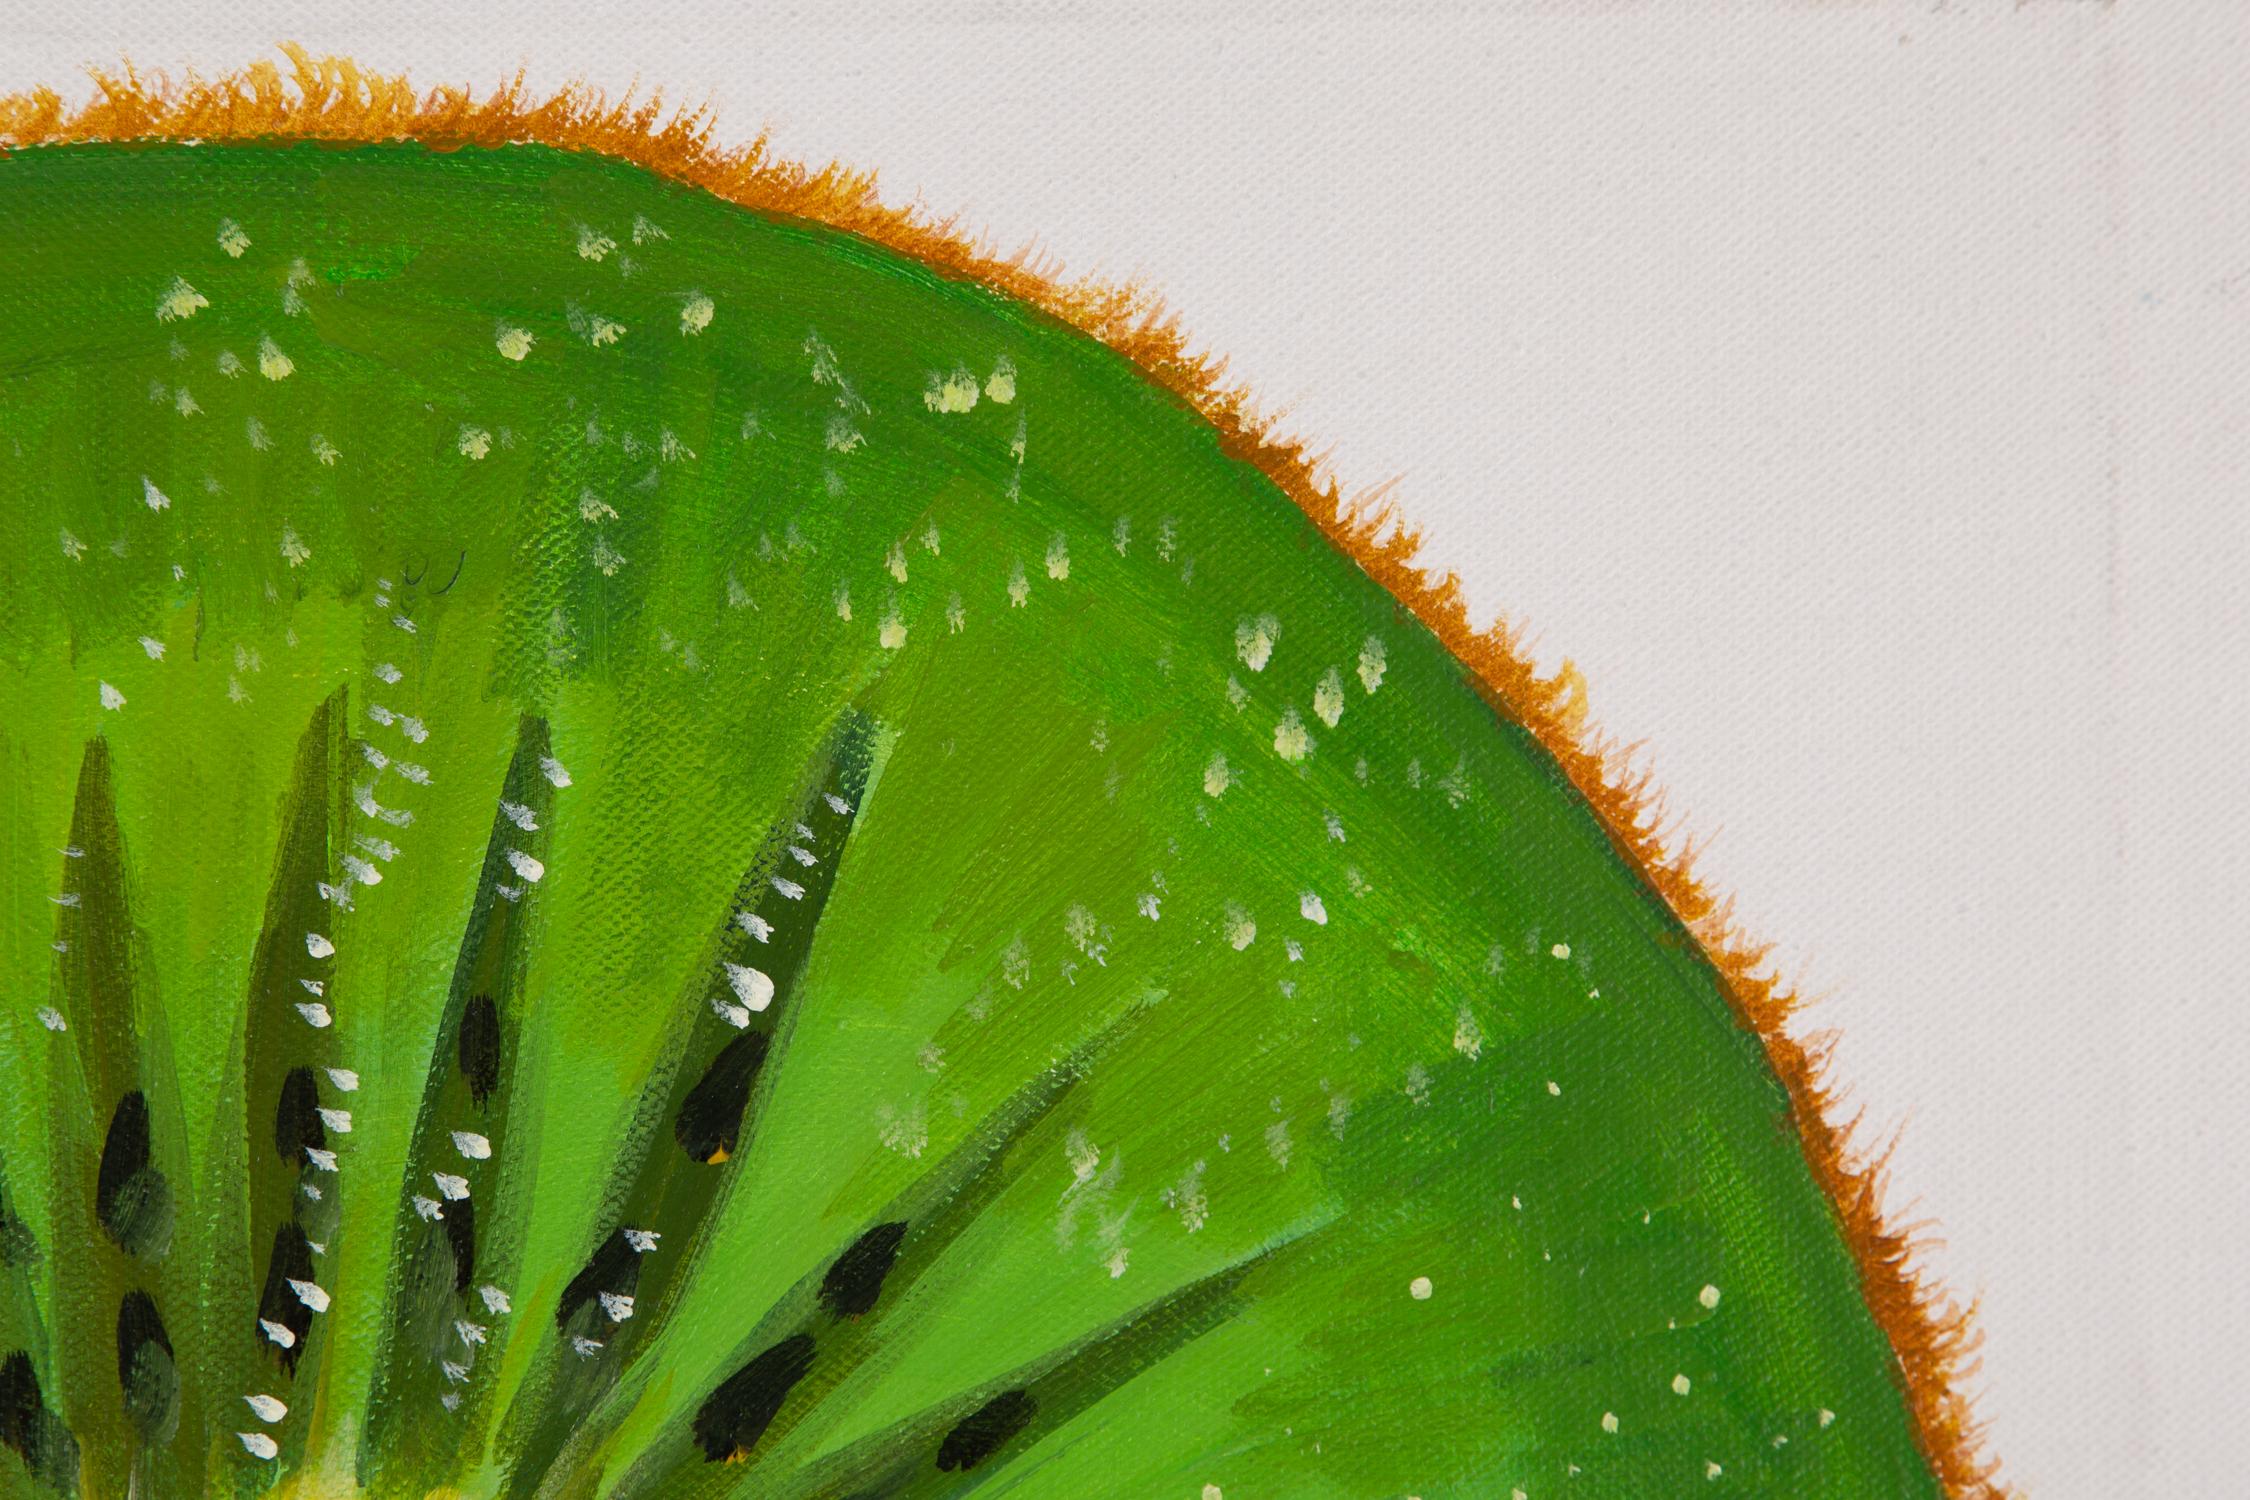  Title: Fruit - Kiwi
 Medium: Oil on canvas
 Size: 19.5 x 19.5inches
 Frame: Framing options available!
 Age: 2000s
 Condition: Painting appears to be in excellent condition.
 Note: This painting is unstretched
 Artist: Wang Shuen
 Provenance: